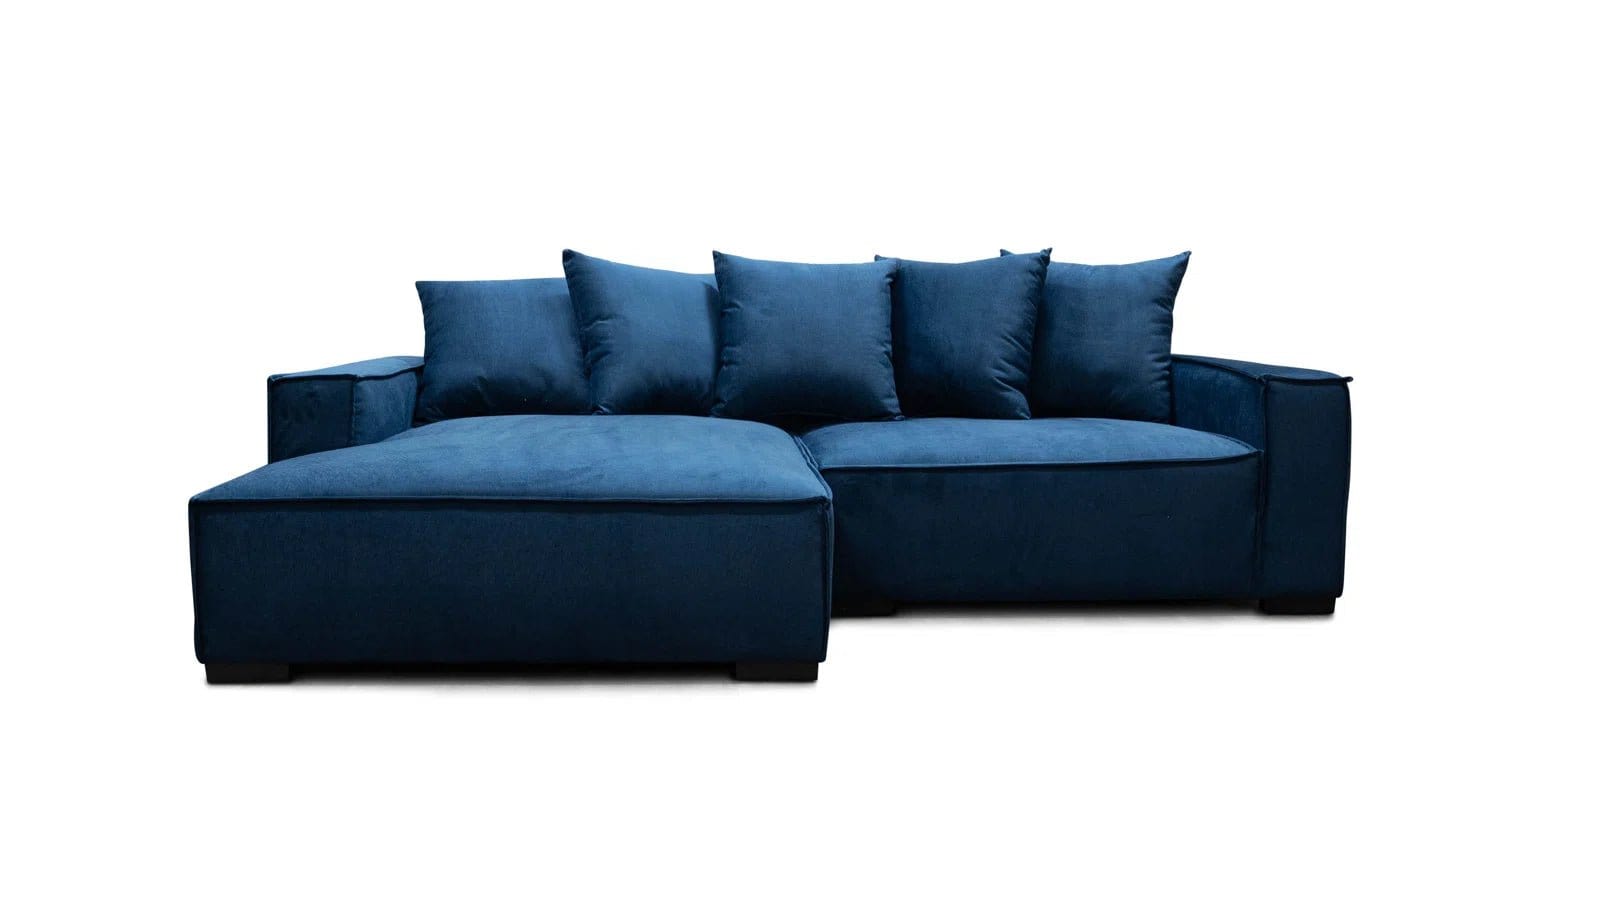 Madison 2 - Piece Upholstered Sectional - We Live Cozy